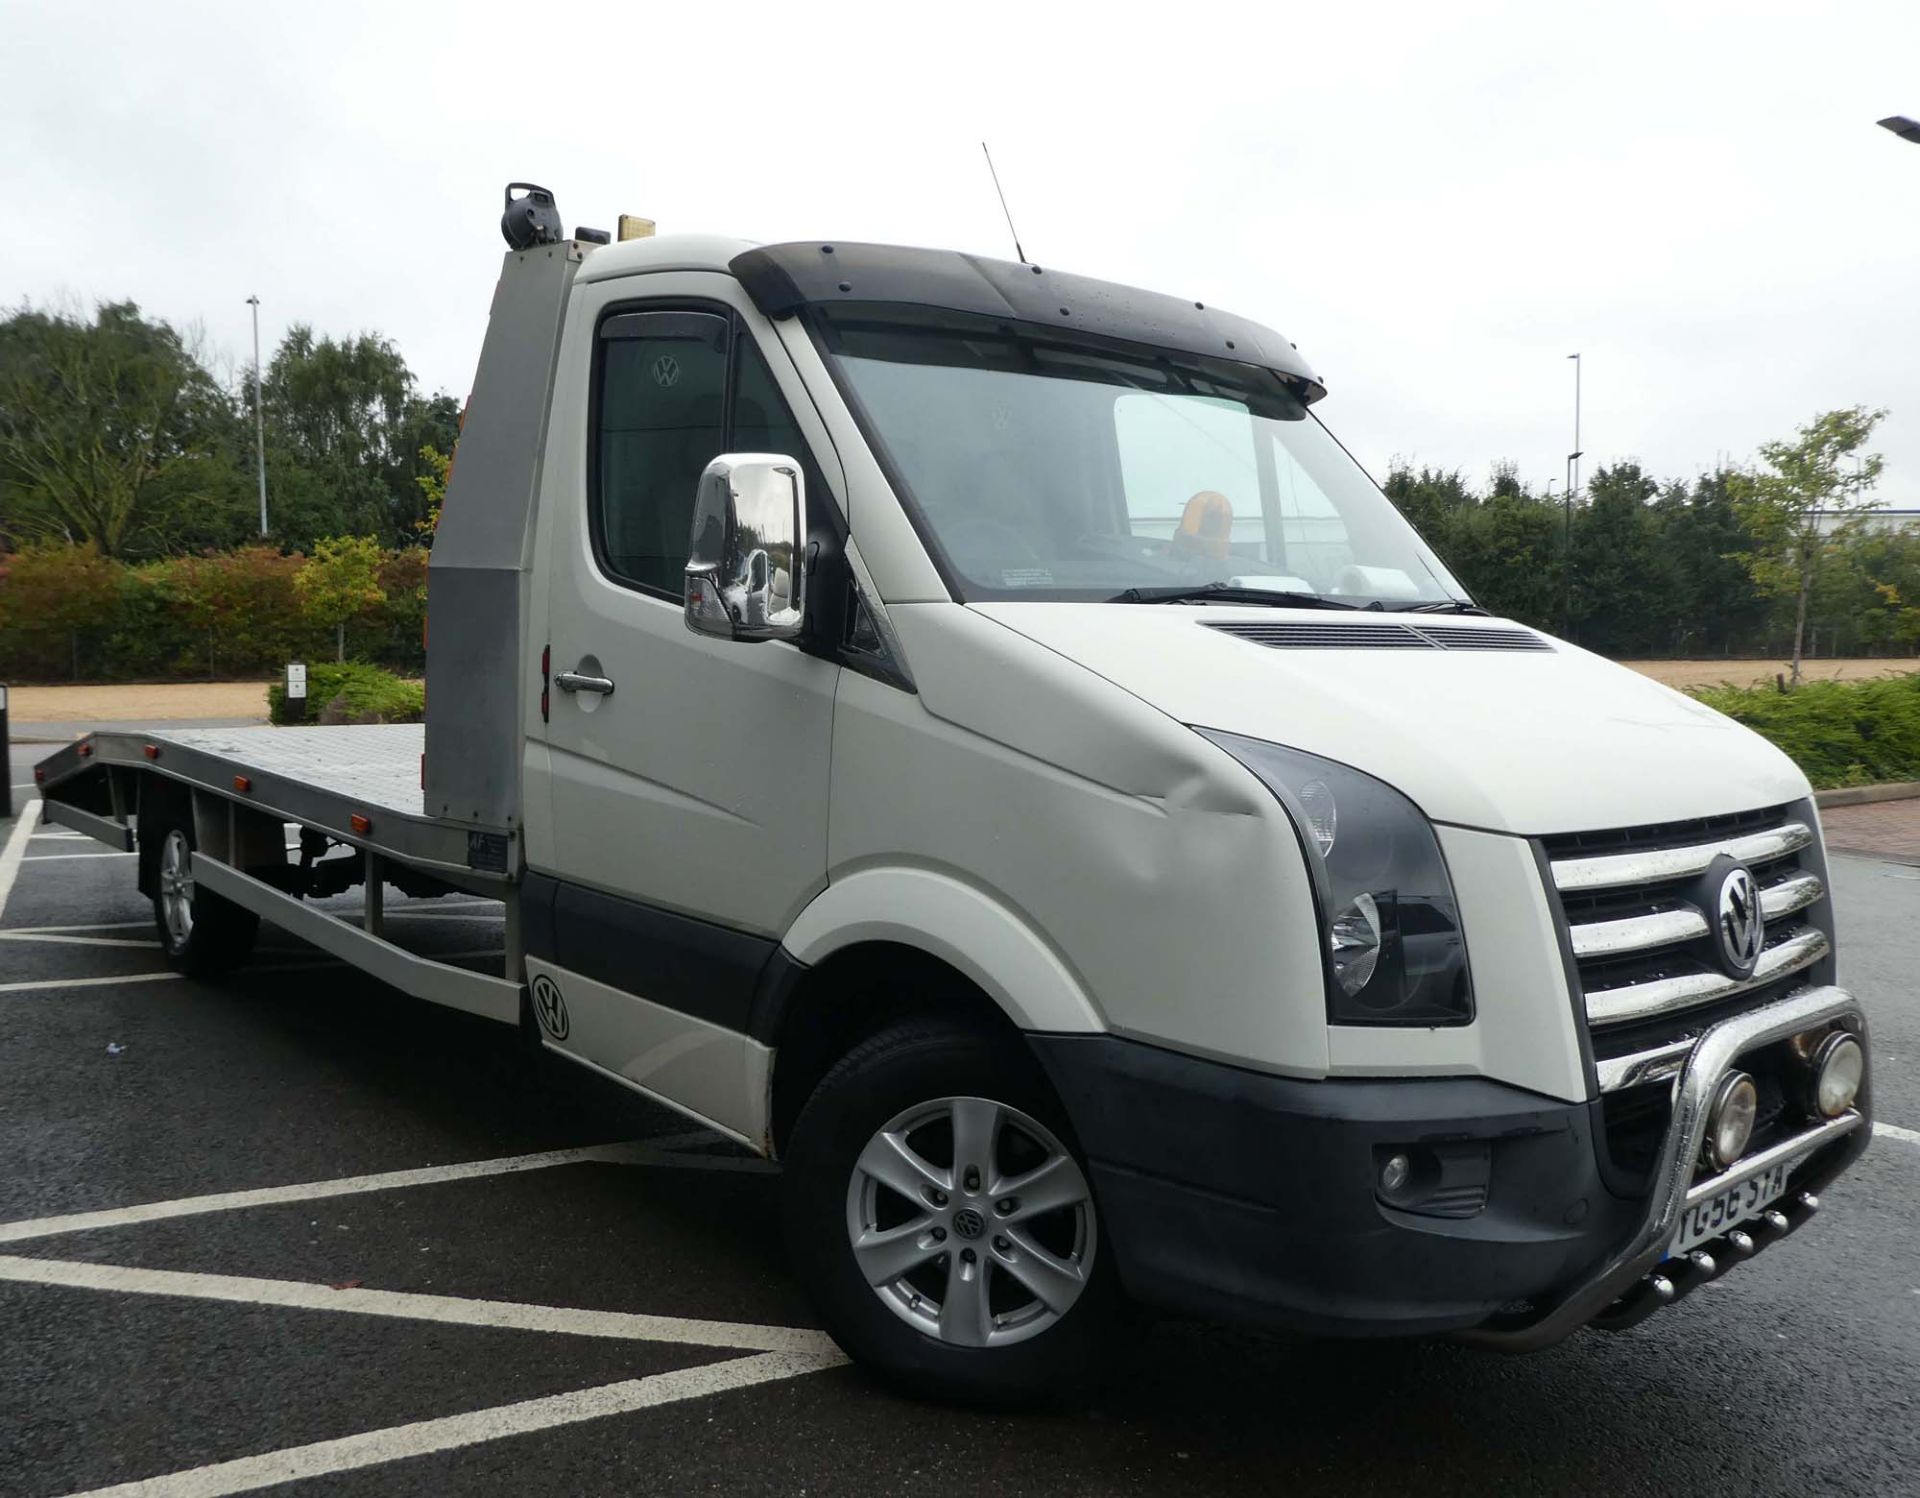 Volkswagen Crafter CR35 109 LWB recovery vehicle with AF Recovery aluminium 5 metre beavertail body,